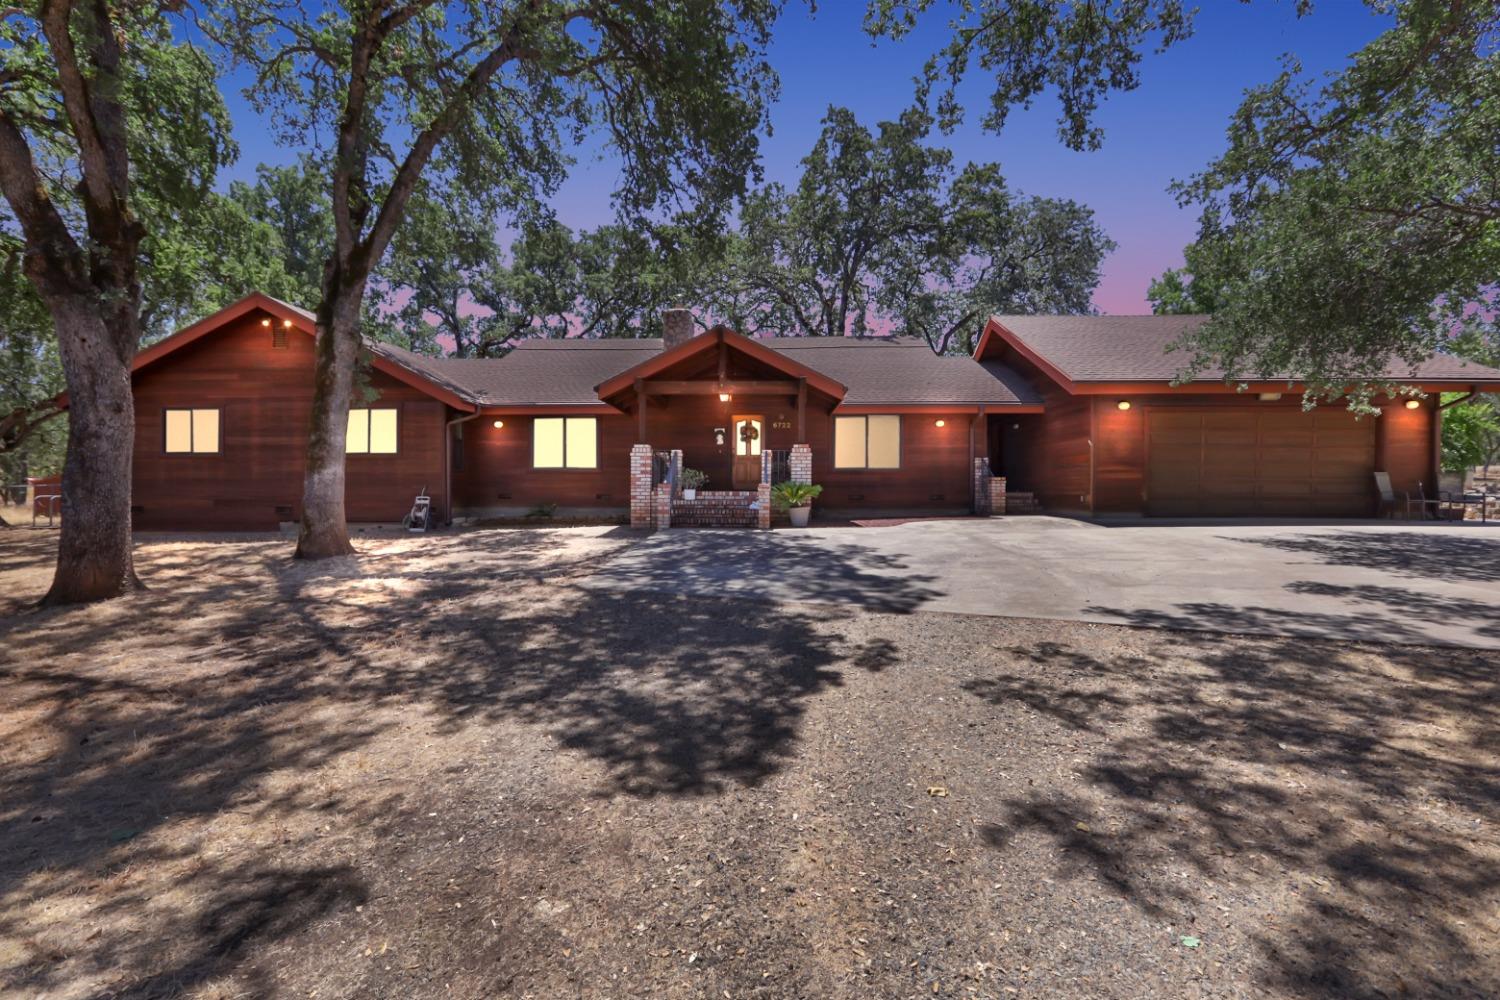 Photo of 6722 Penny Wy in Browns Valley, CA